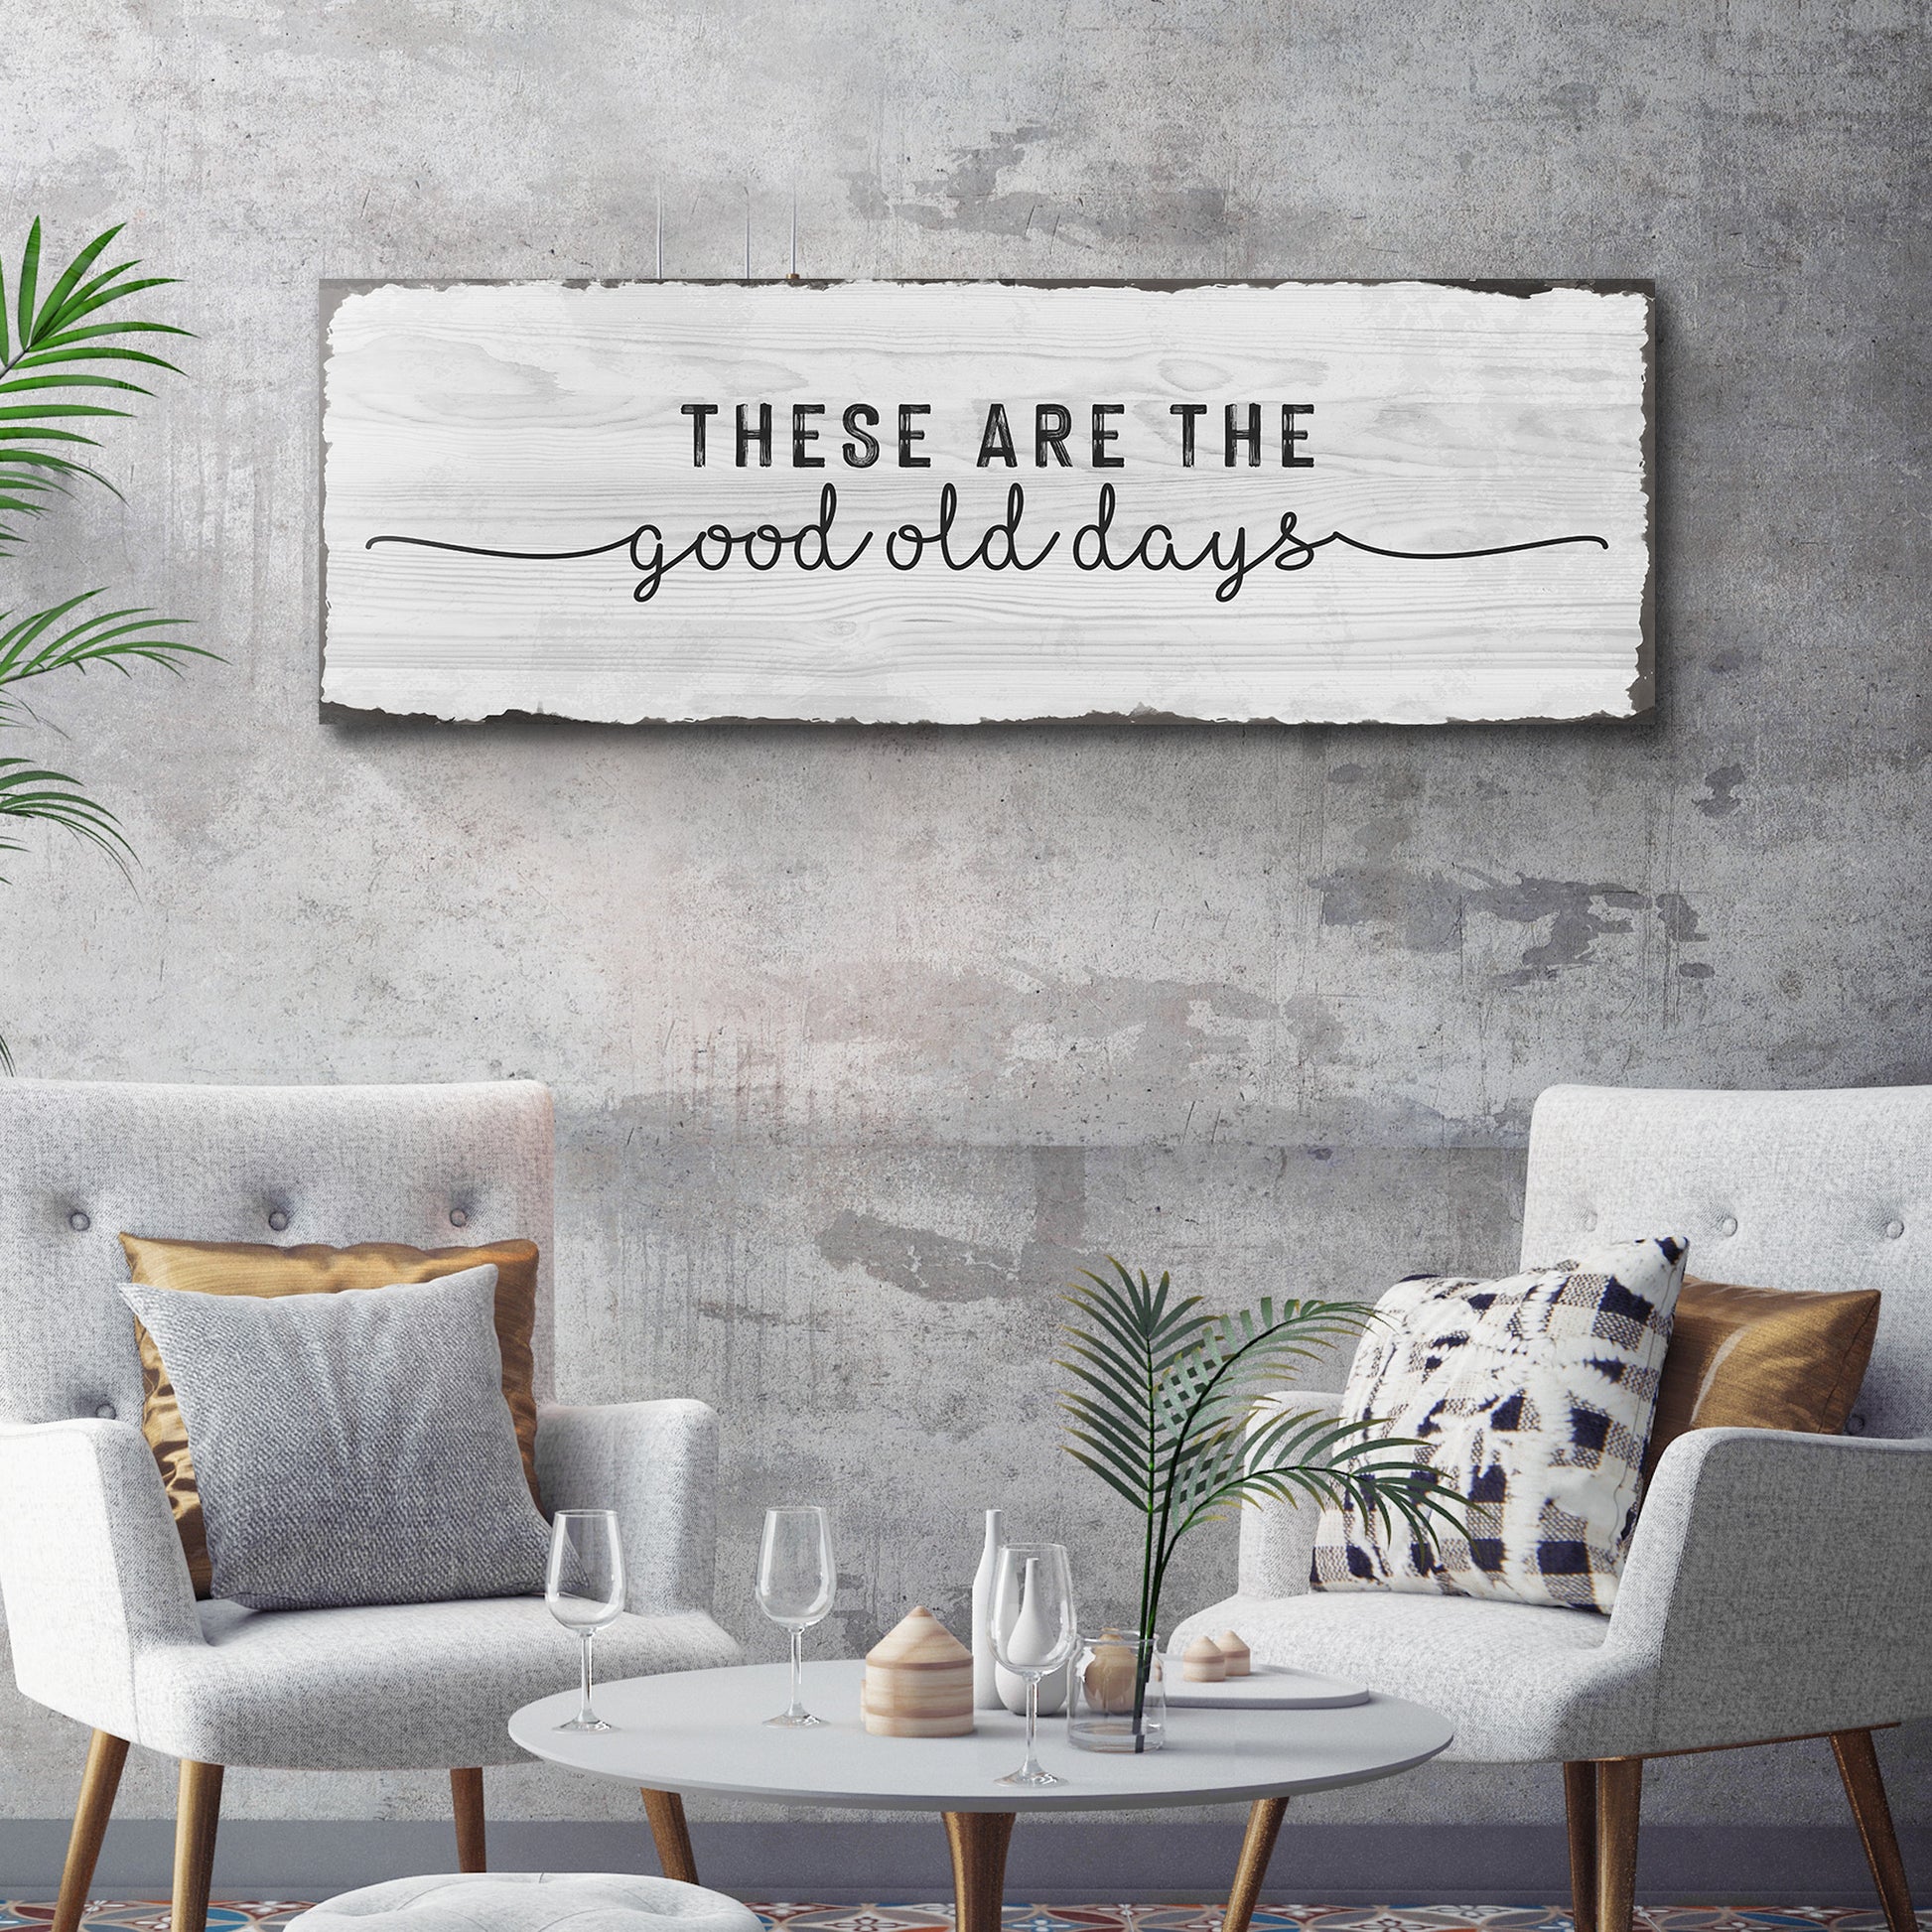 These are the Good Old Days  Sign - Image by Tailored Canvases